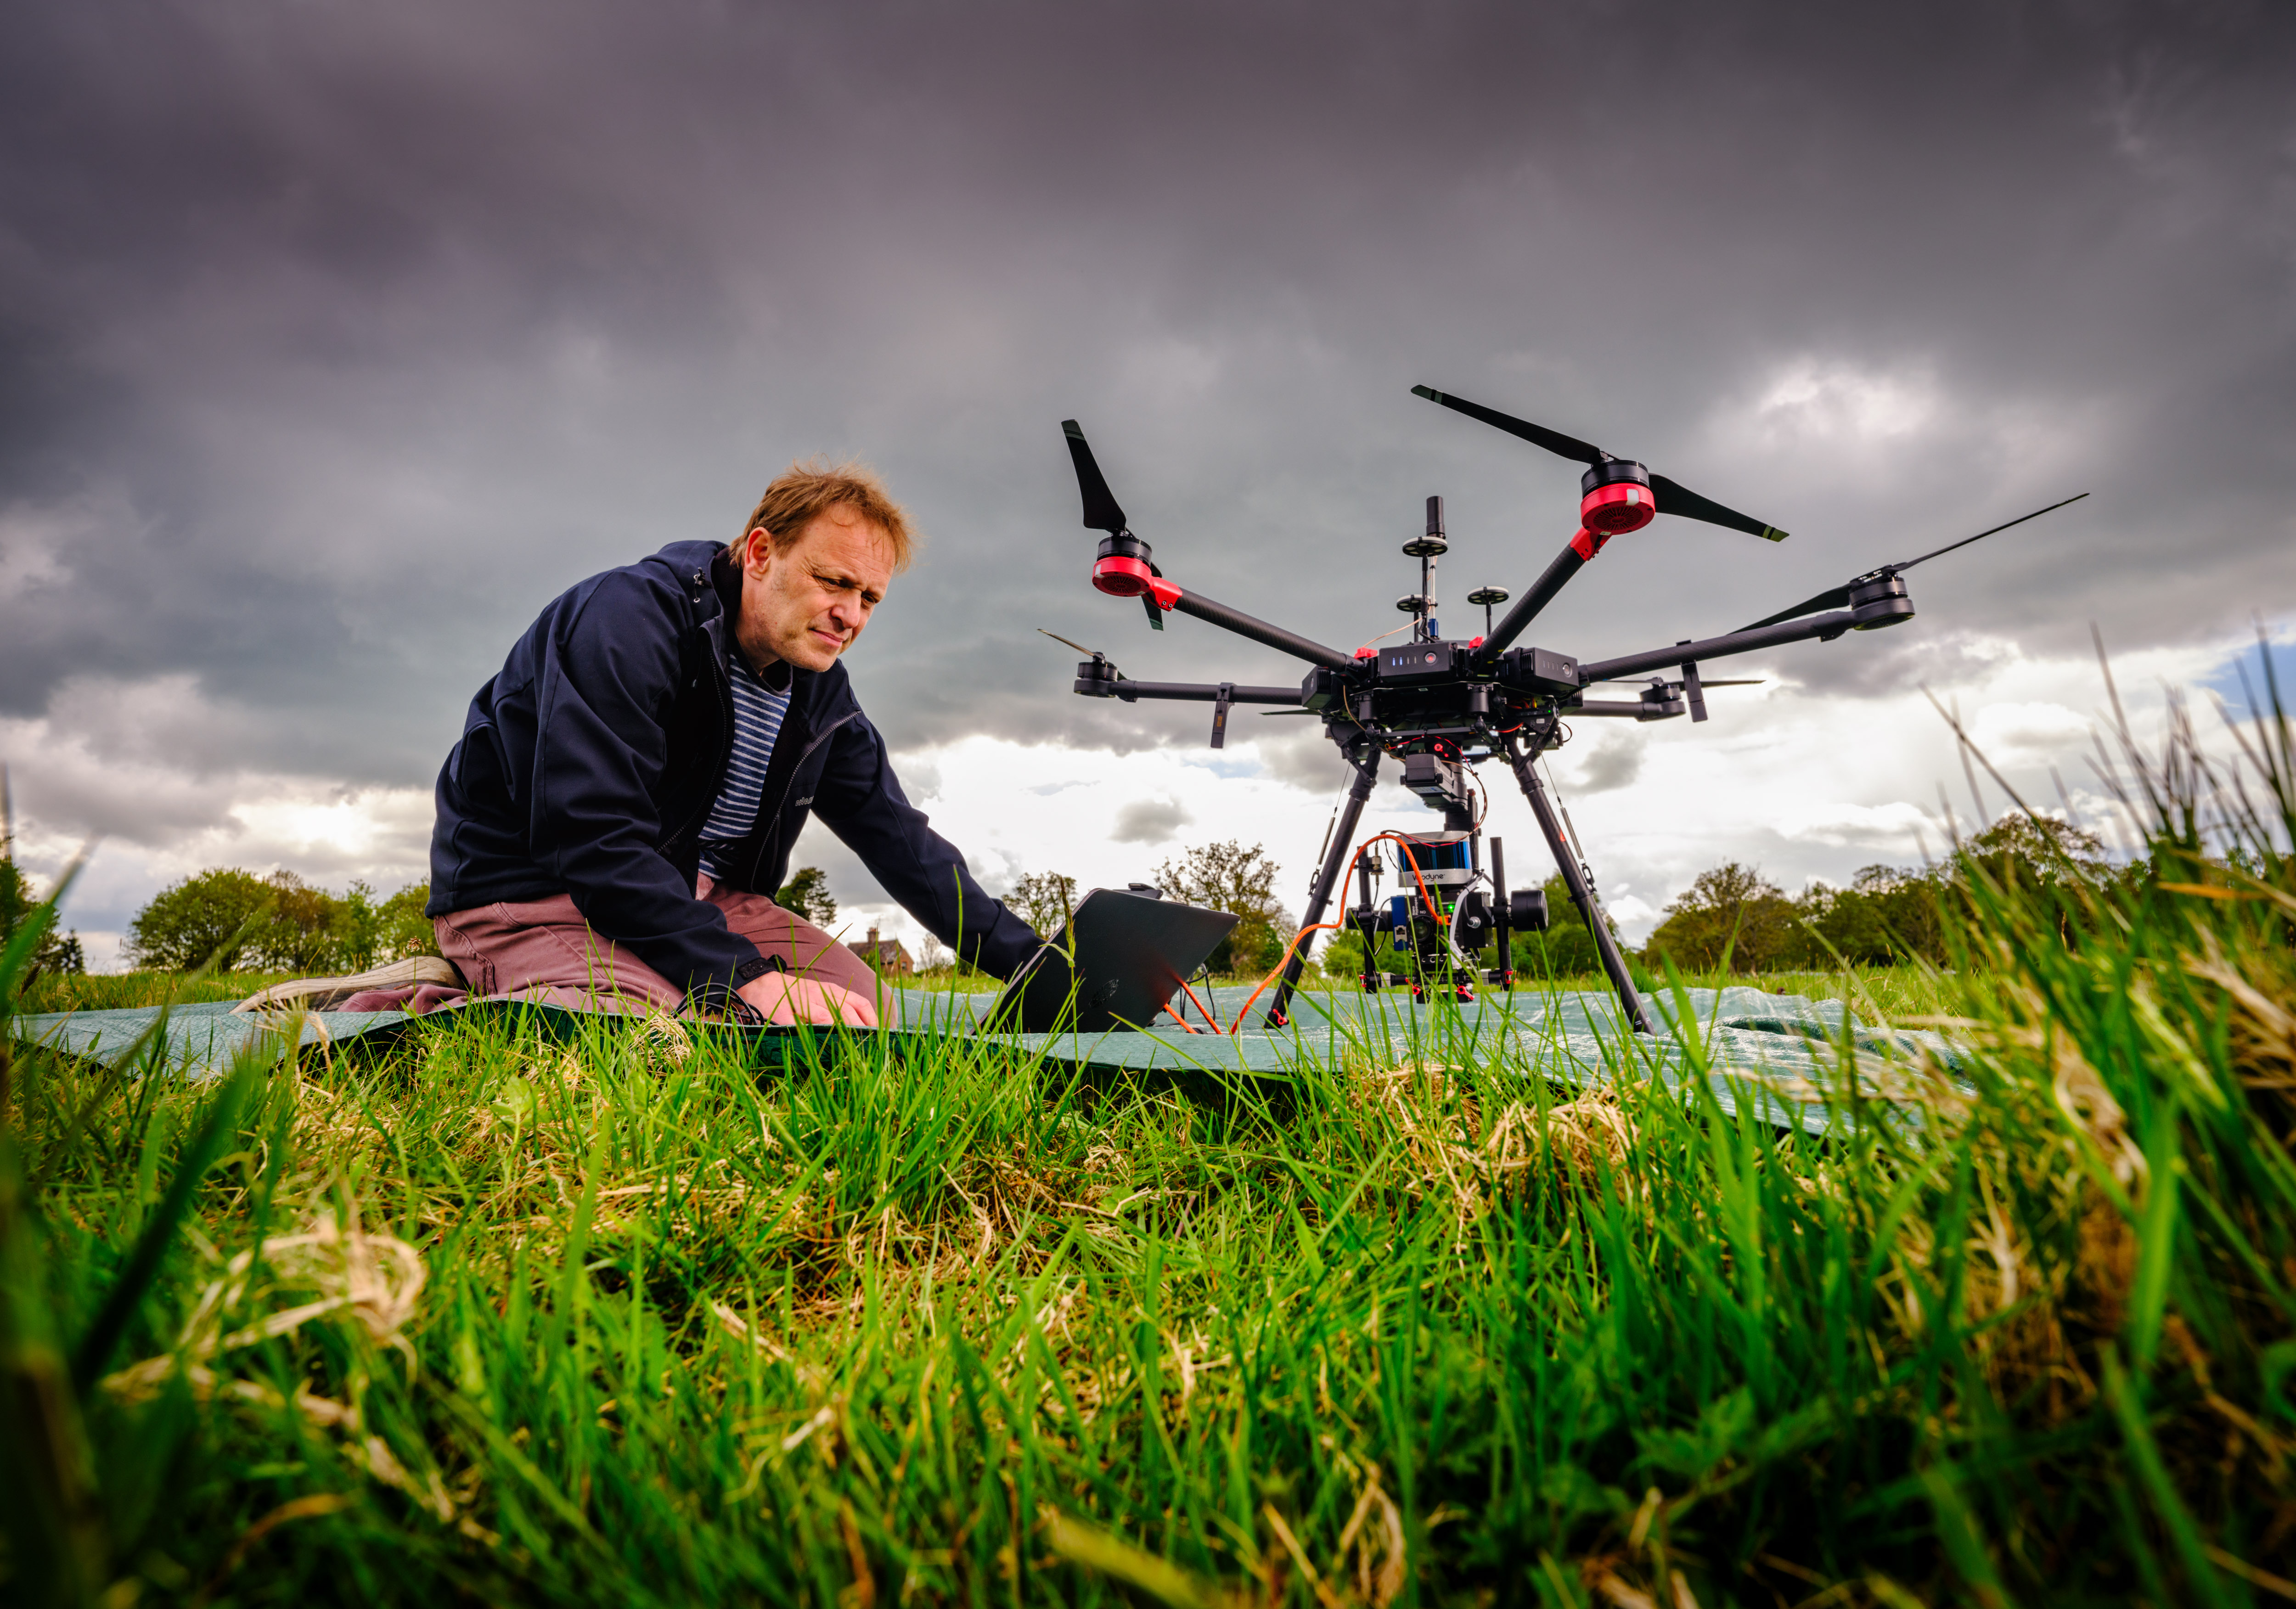 Kew scientist kneeling down with a drone